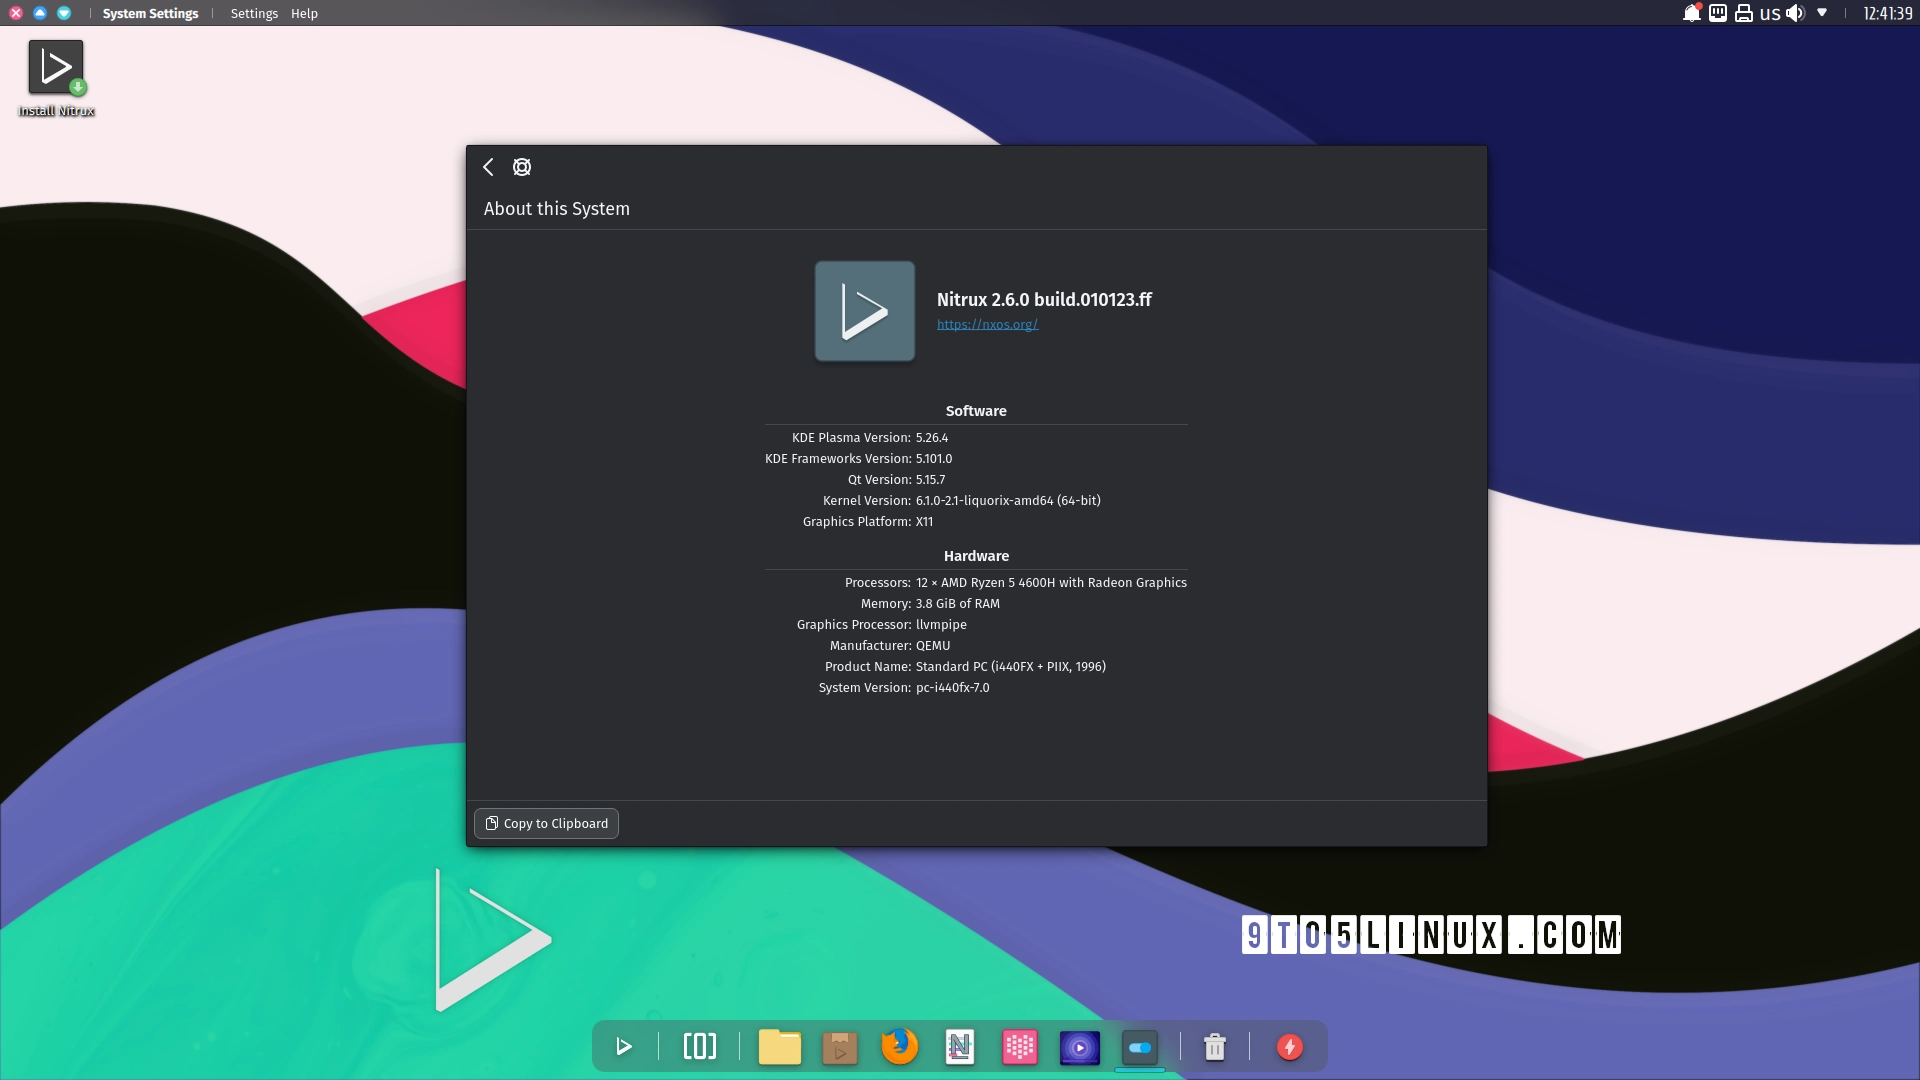 Nitrux 2.6 Is Out Powered by Linux 6.1, Adds PipeWire and Wayland by Default